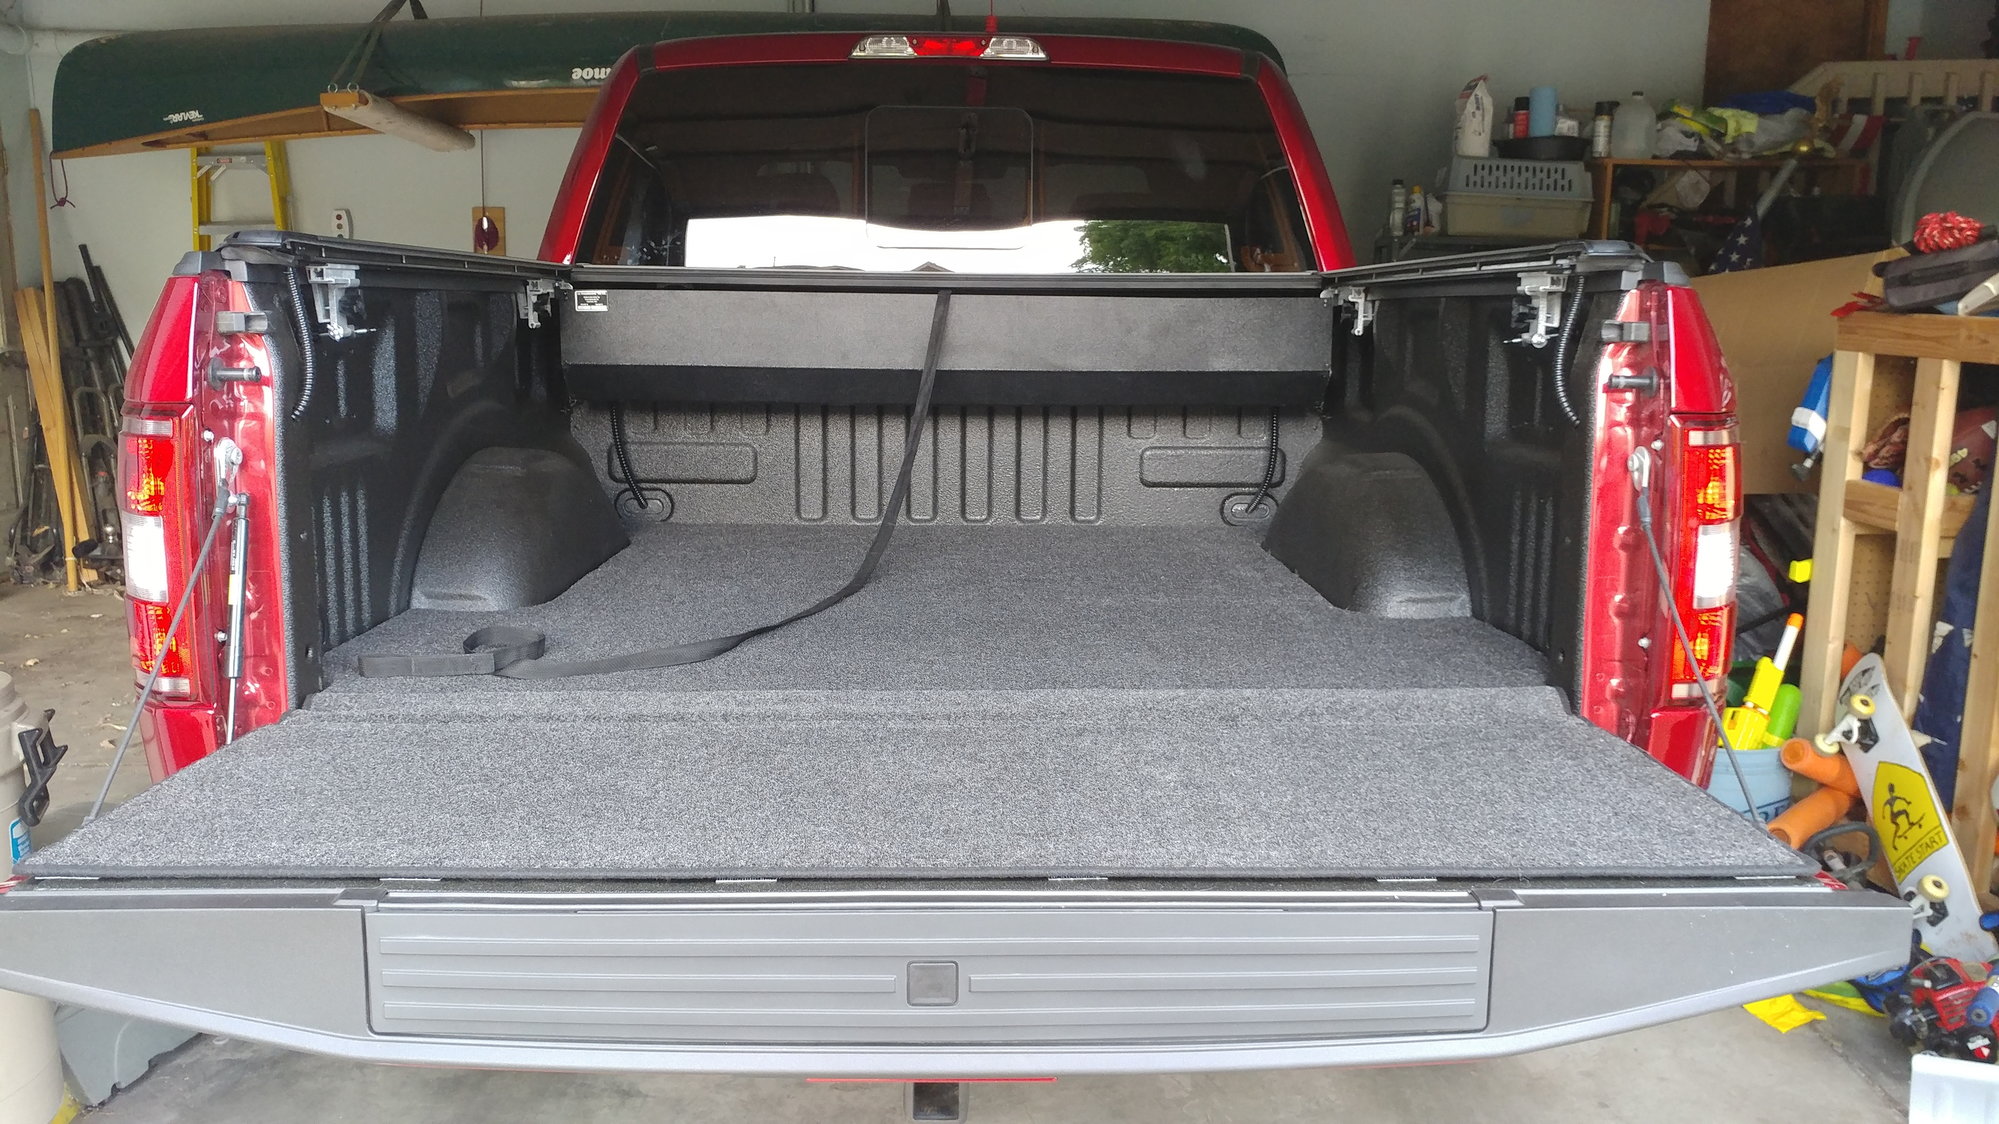 Drilling Holes In Truck Bed For Drain Tubes - GeloManias 2020 Ram 1500 Bed Drain Holes